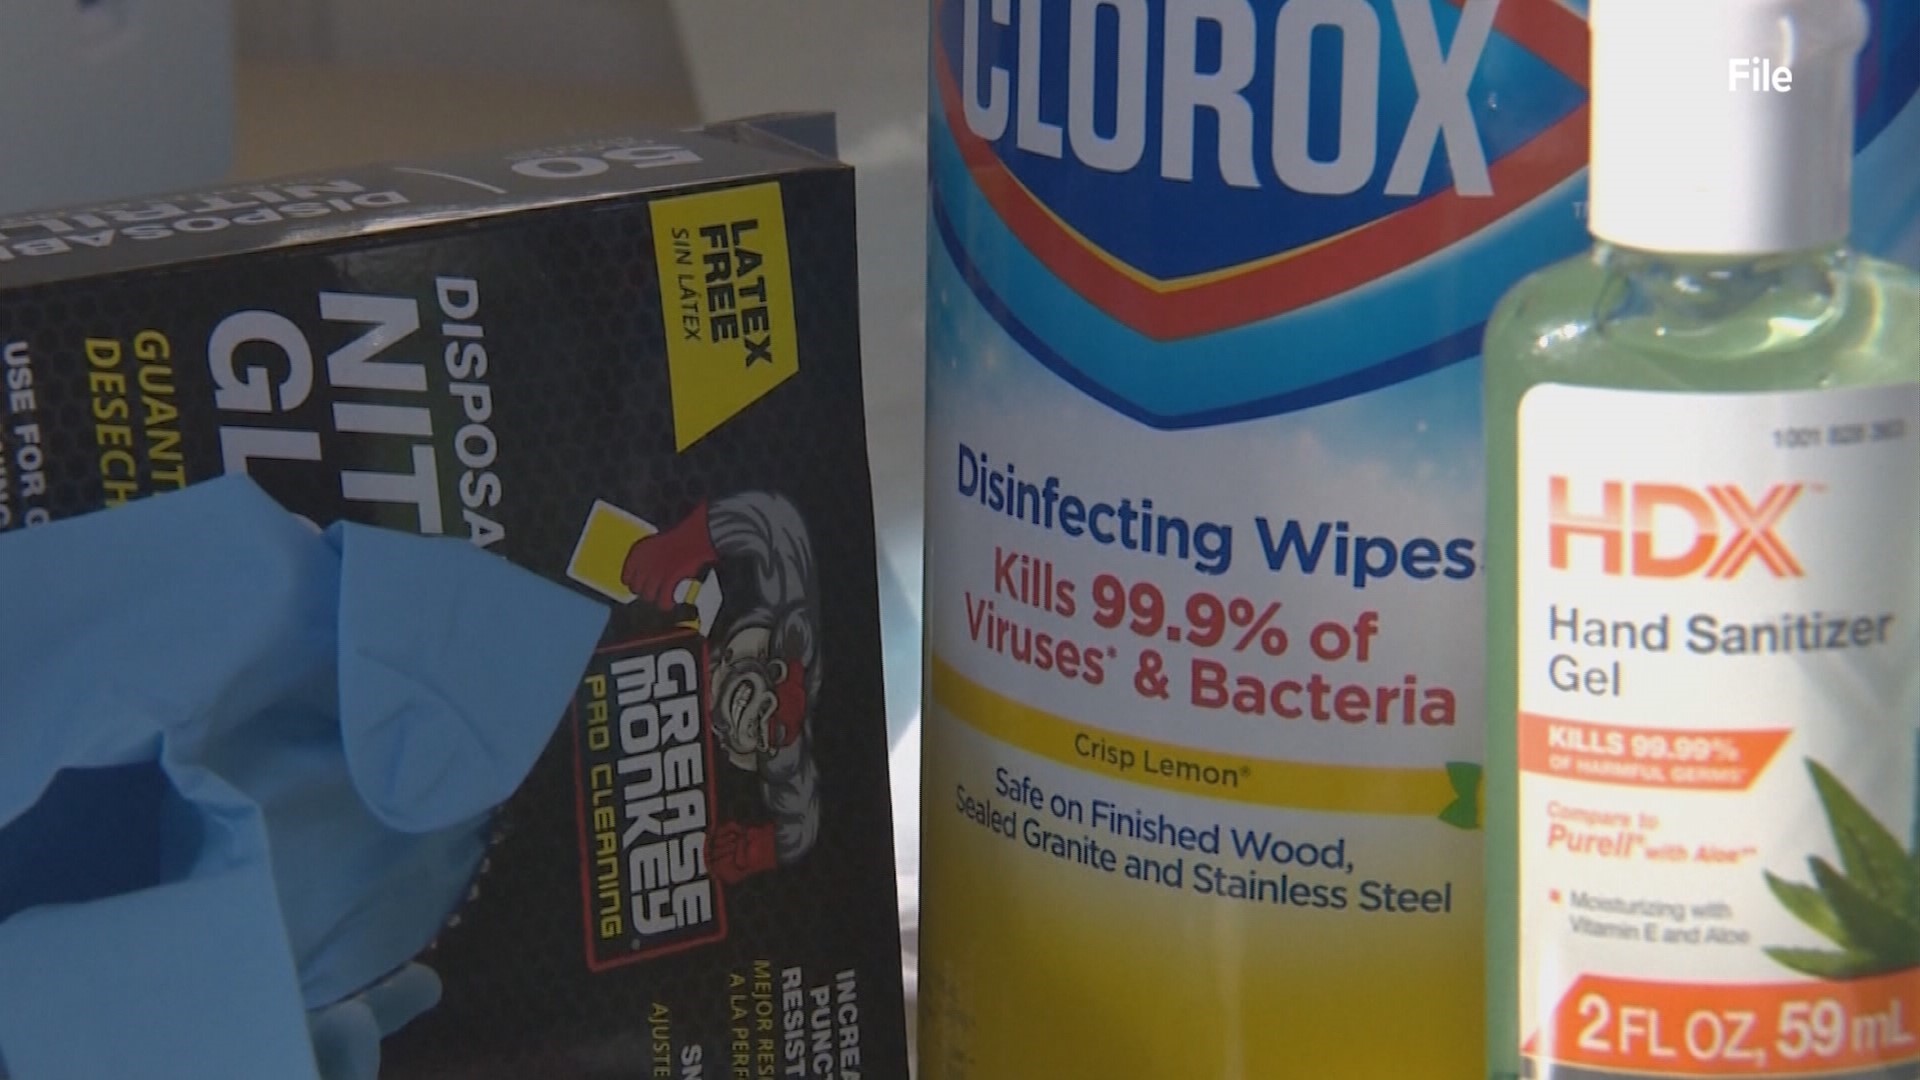 Can you use disinfectants like clorox and lysol to clean your phone?